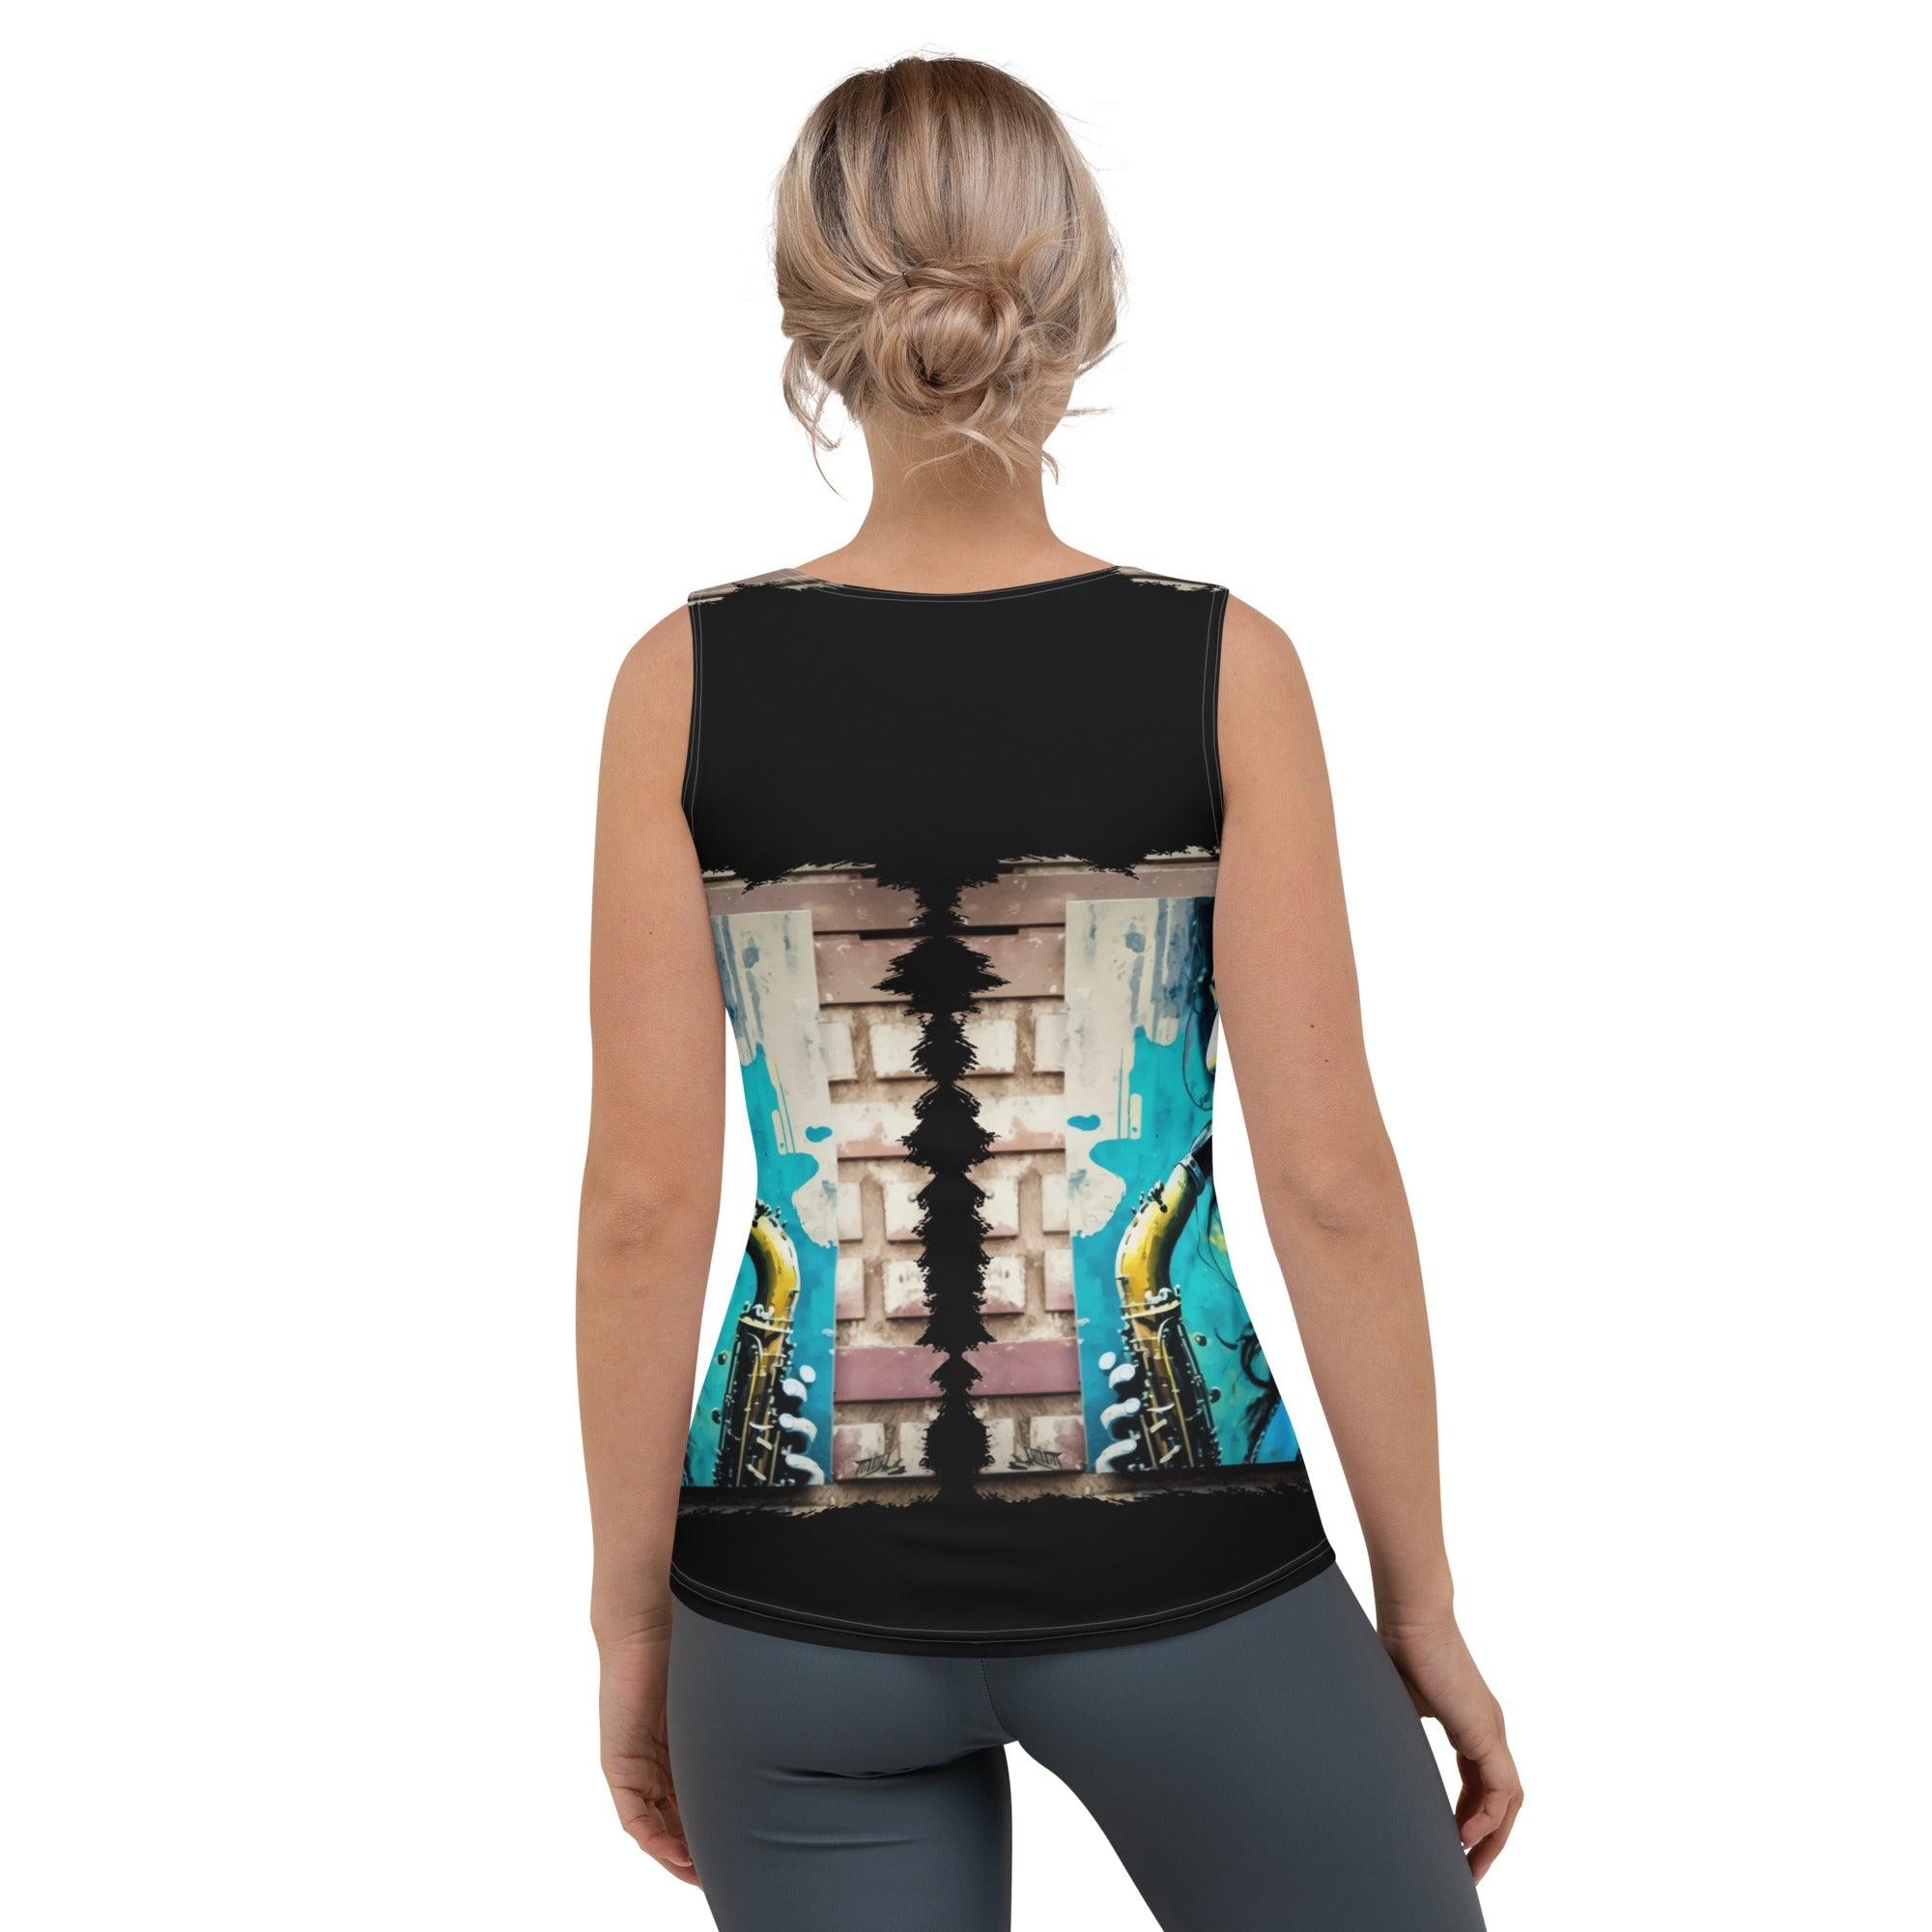 She Breathes Through Music Sublimation Cut & Sew Tank Top - Beyond T-shirts